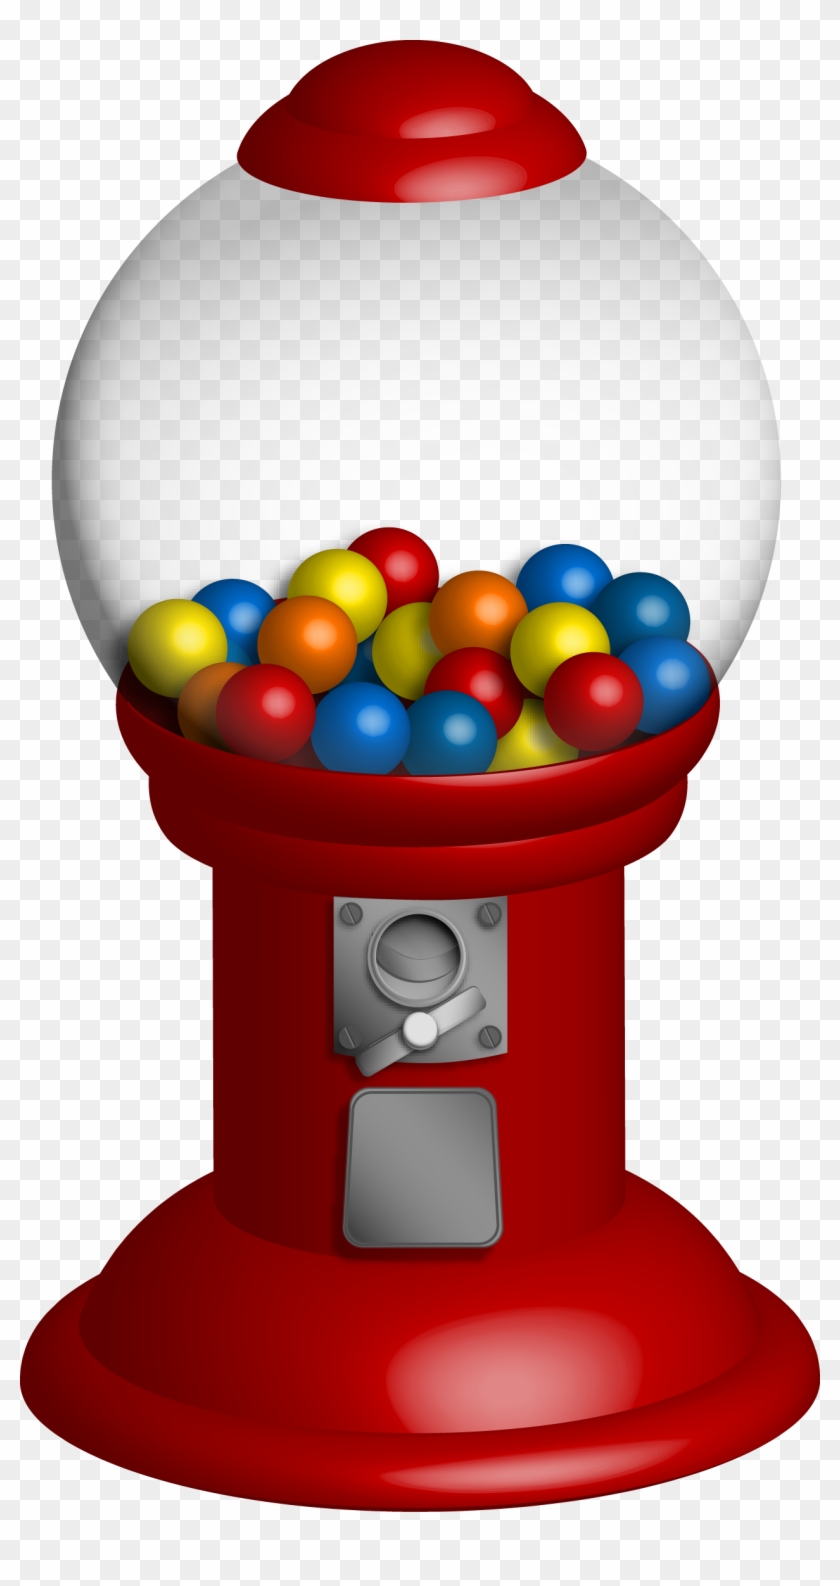 83-831632_gumball-machine-clipart-bubble-gum-machine-png.png